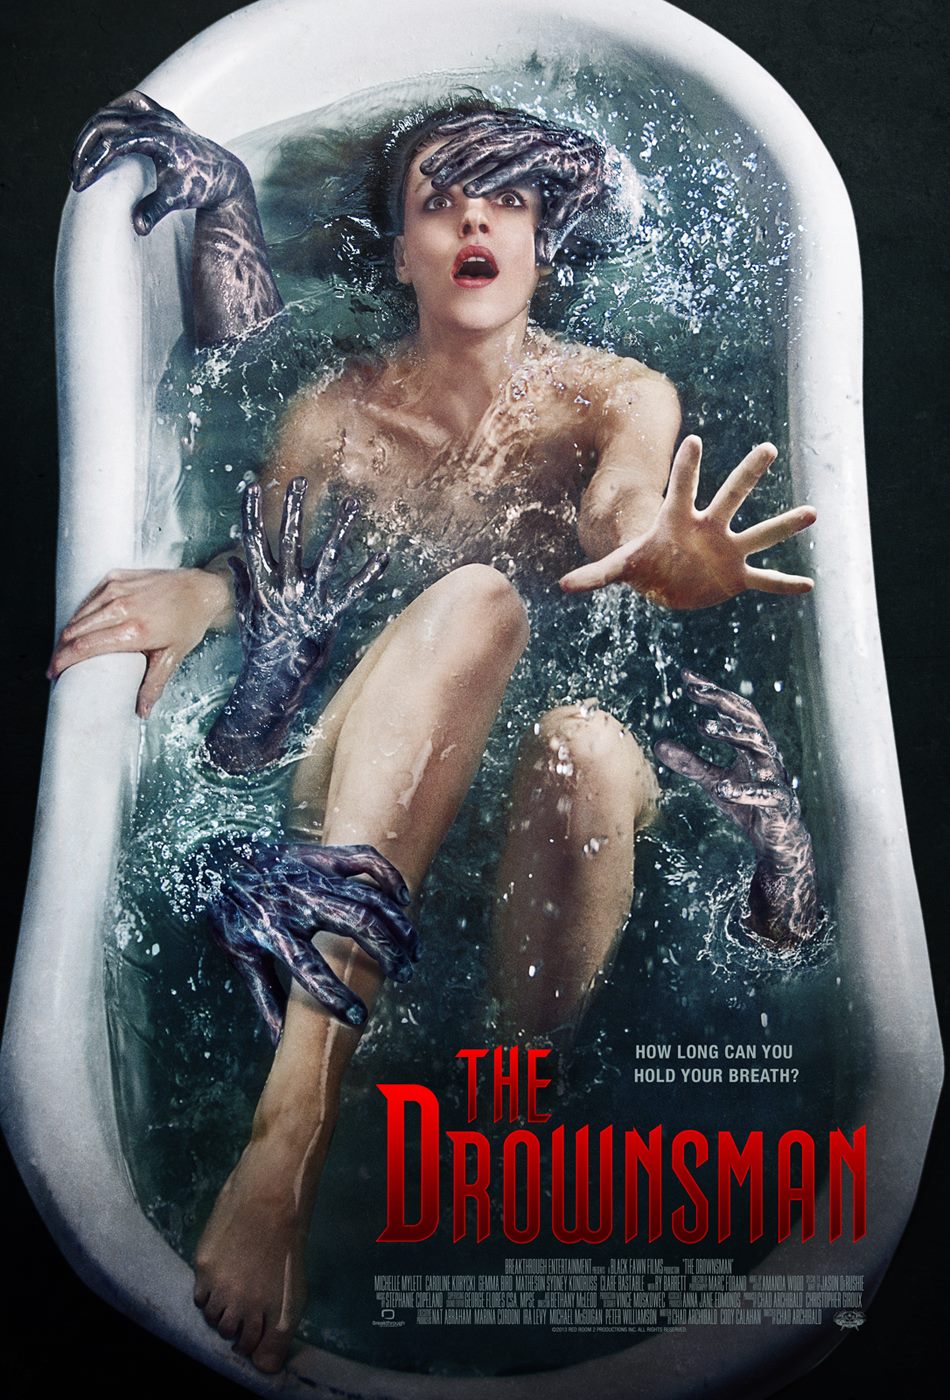 THE DROWNSMAN offiical release poster. Directed by Chad Archibald.